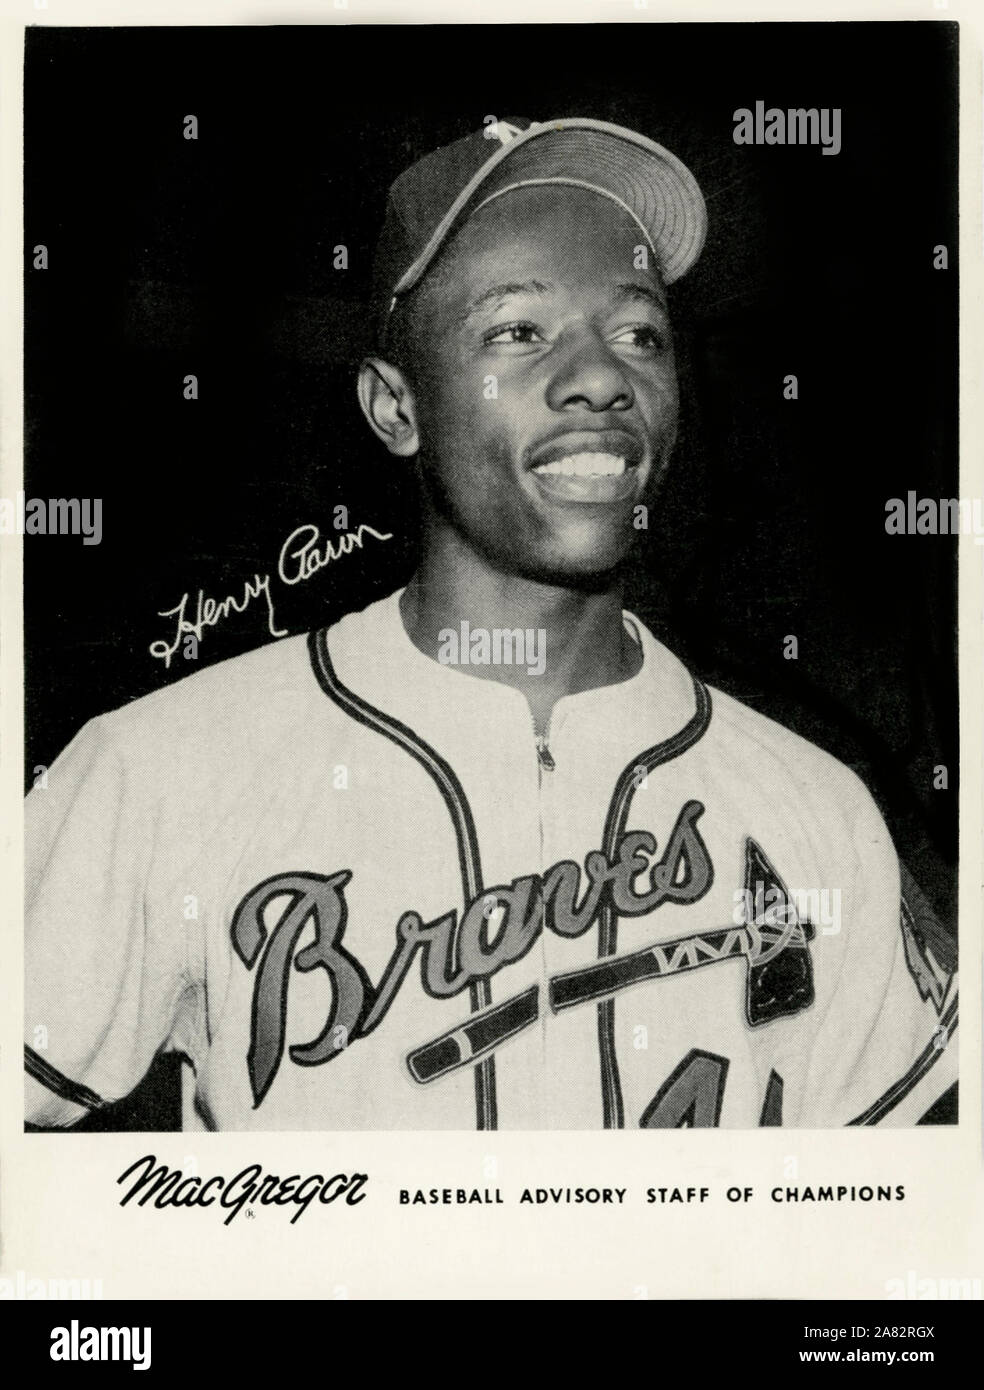 Hall of Fame baseball player Hank Aaron in autographed 1960's era